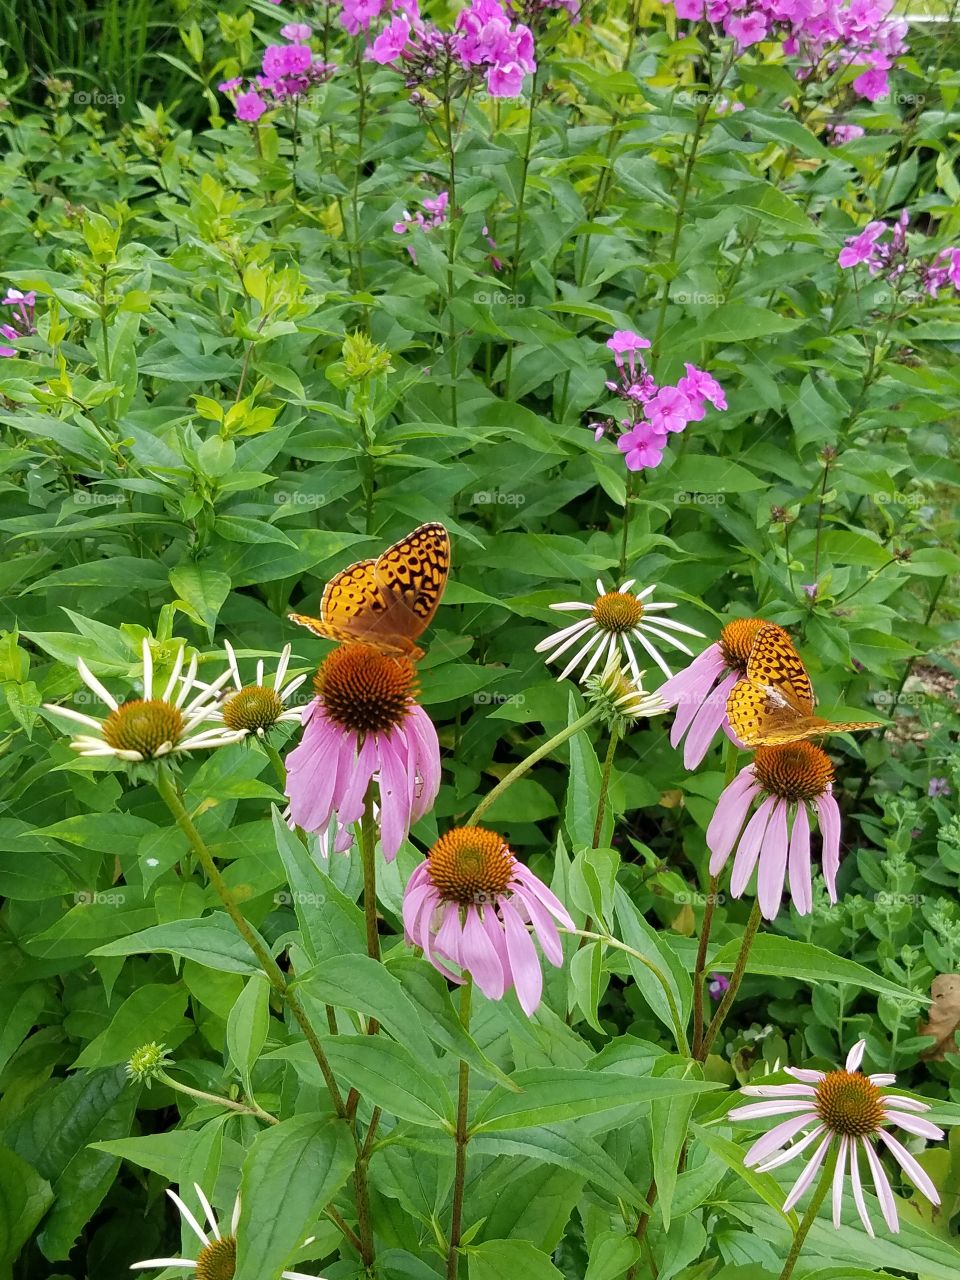 Flowers and butterflies, Maine